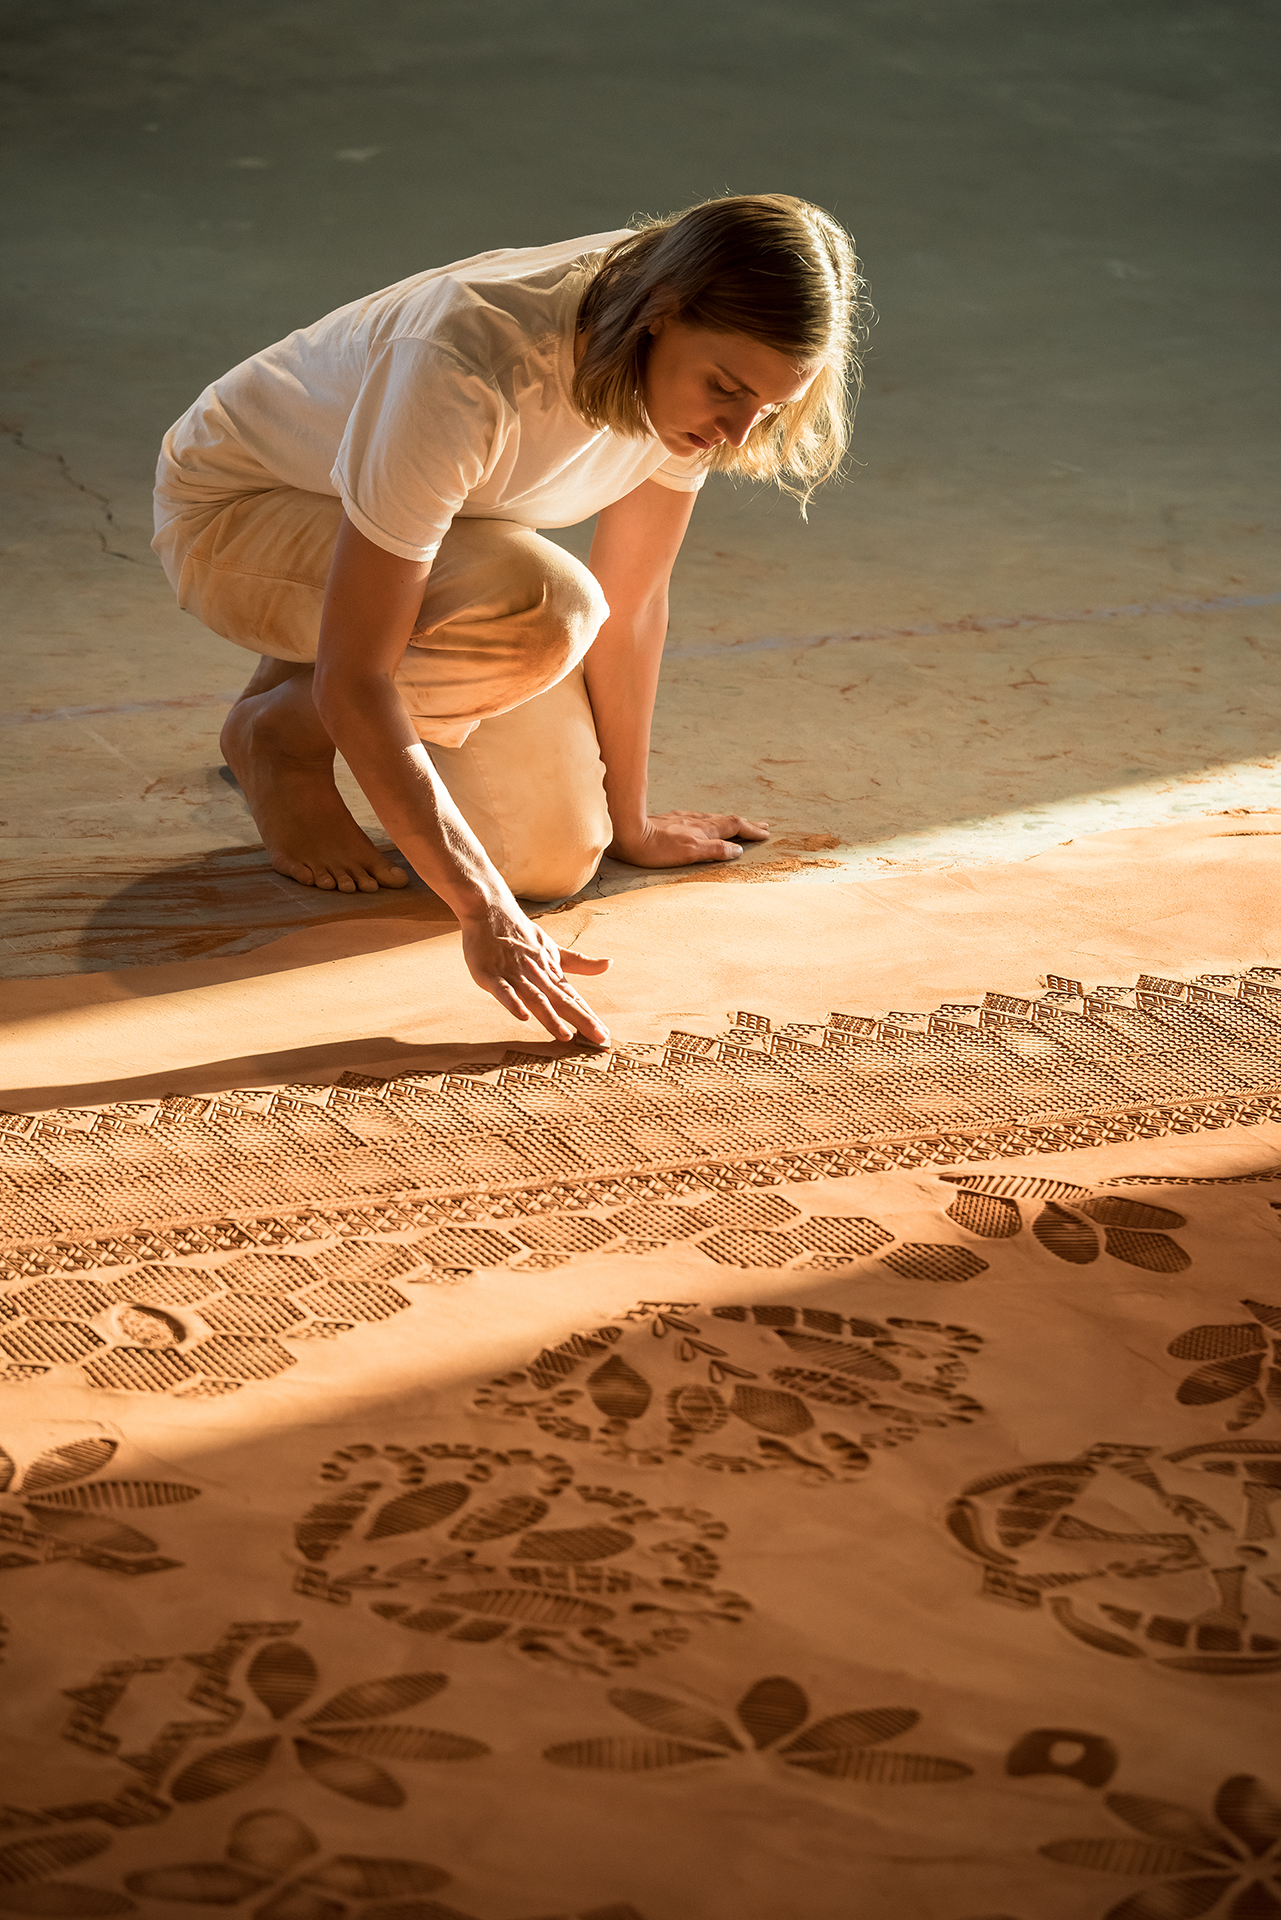 Photo of the artist working on a monumental, low relief sculpture mimicking an intricate patterned rug, made with modified shoe soles imprinting ground & sifted Oklahoma red dirt